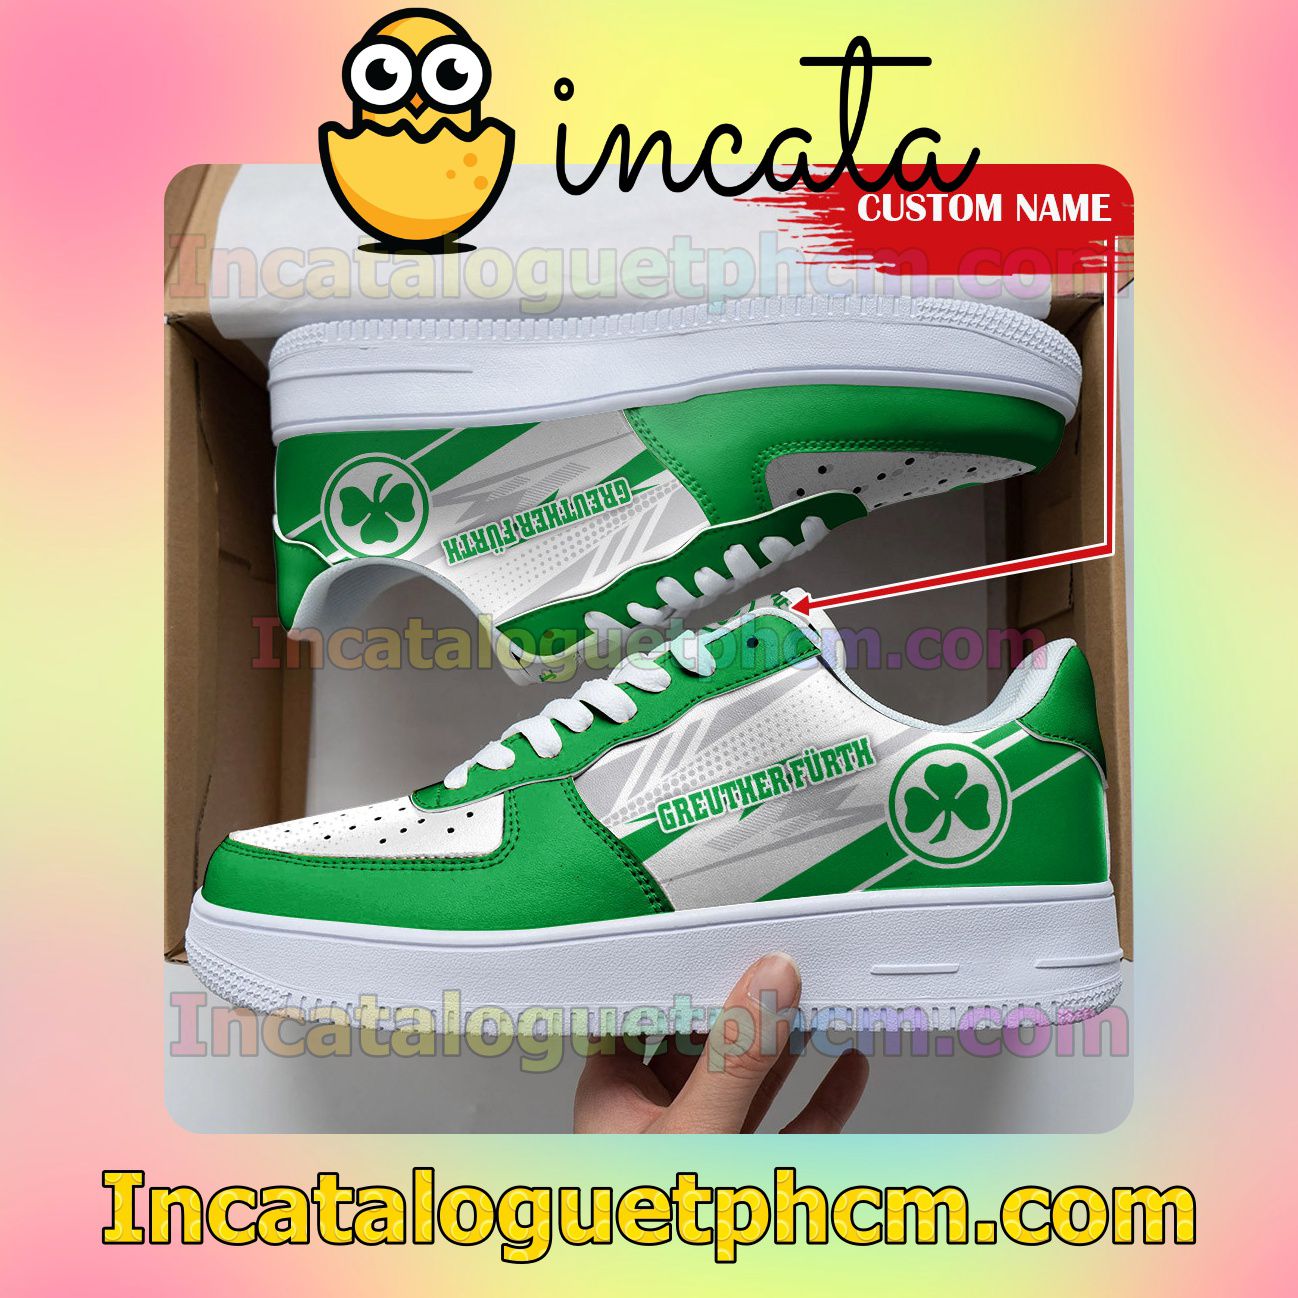 Present Personalized Bundesliga Greuther Fürth Custom Name Nike Low Shoes Sneakers